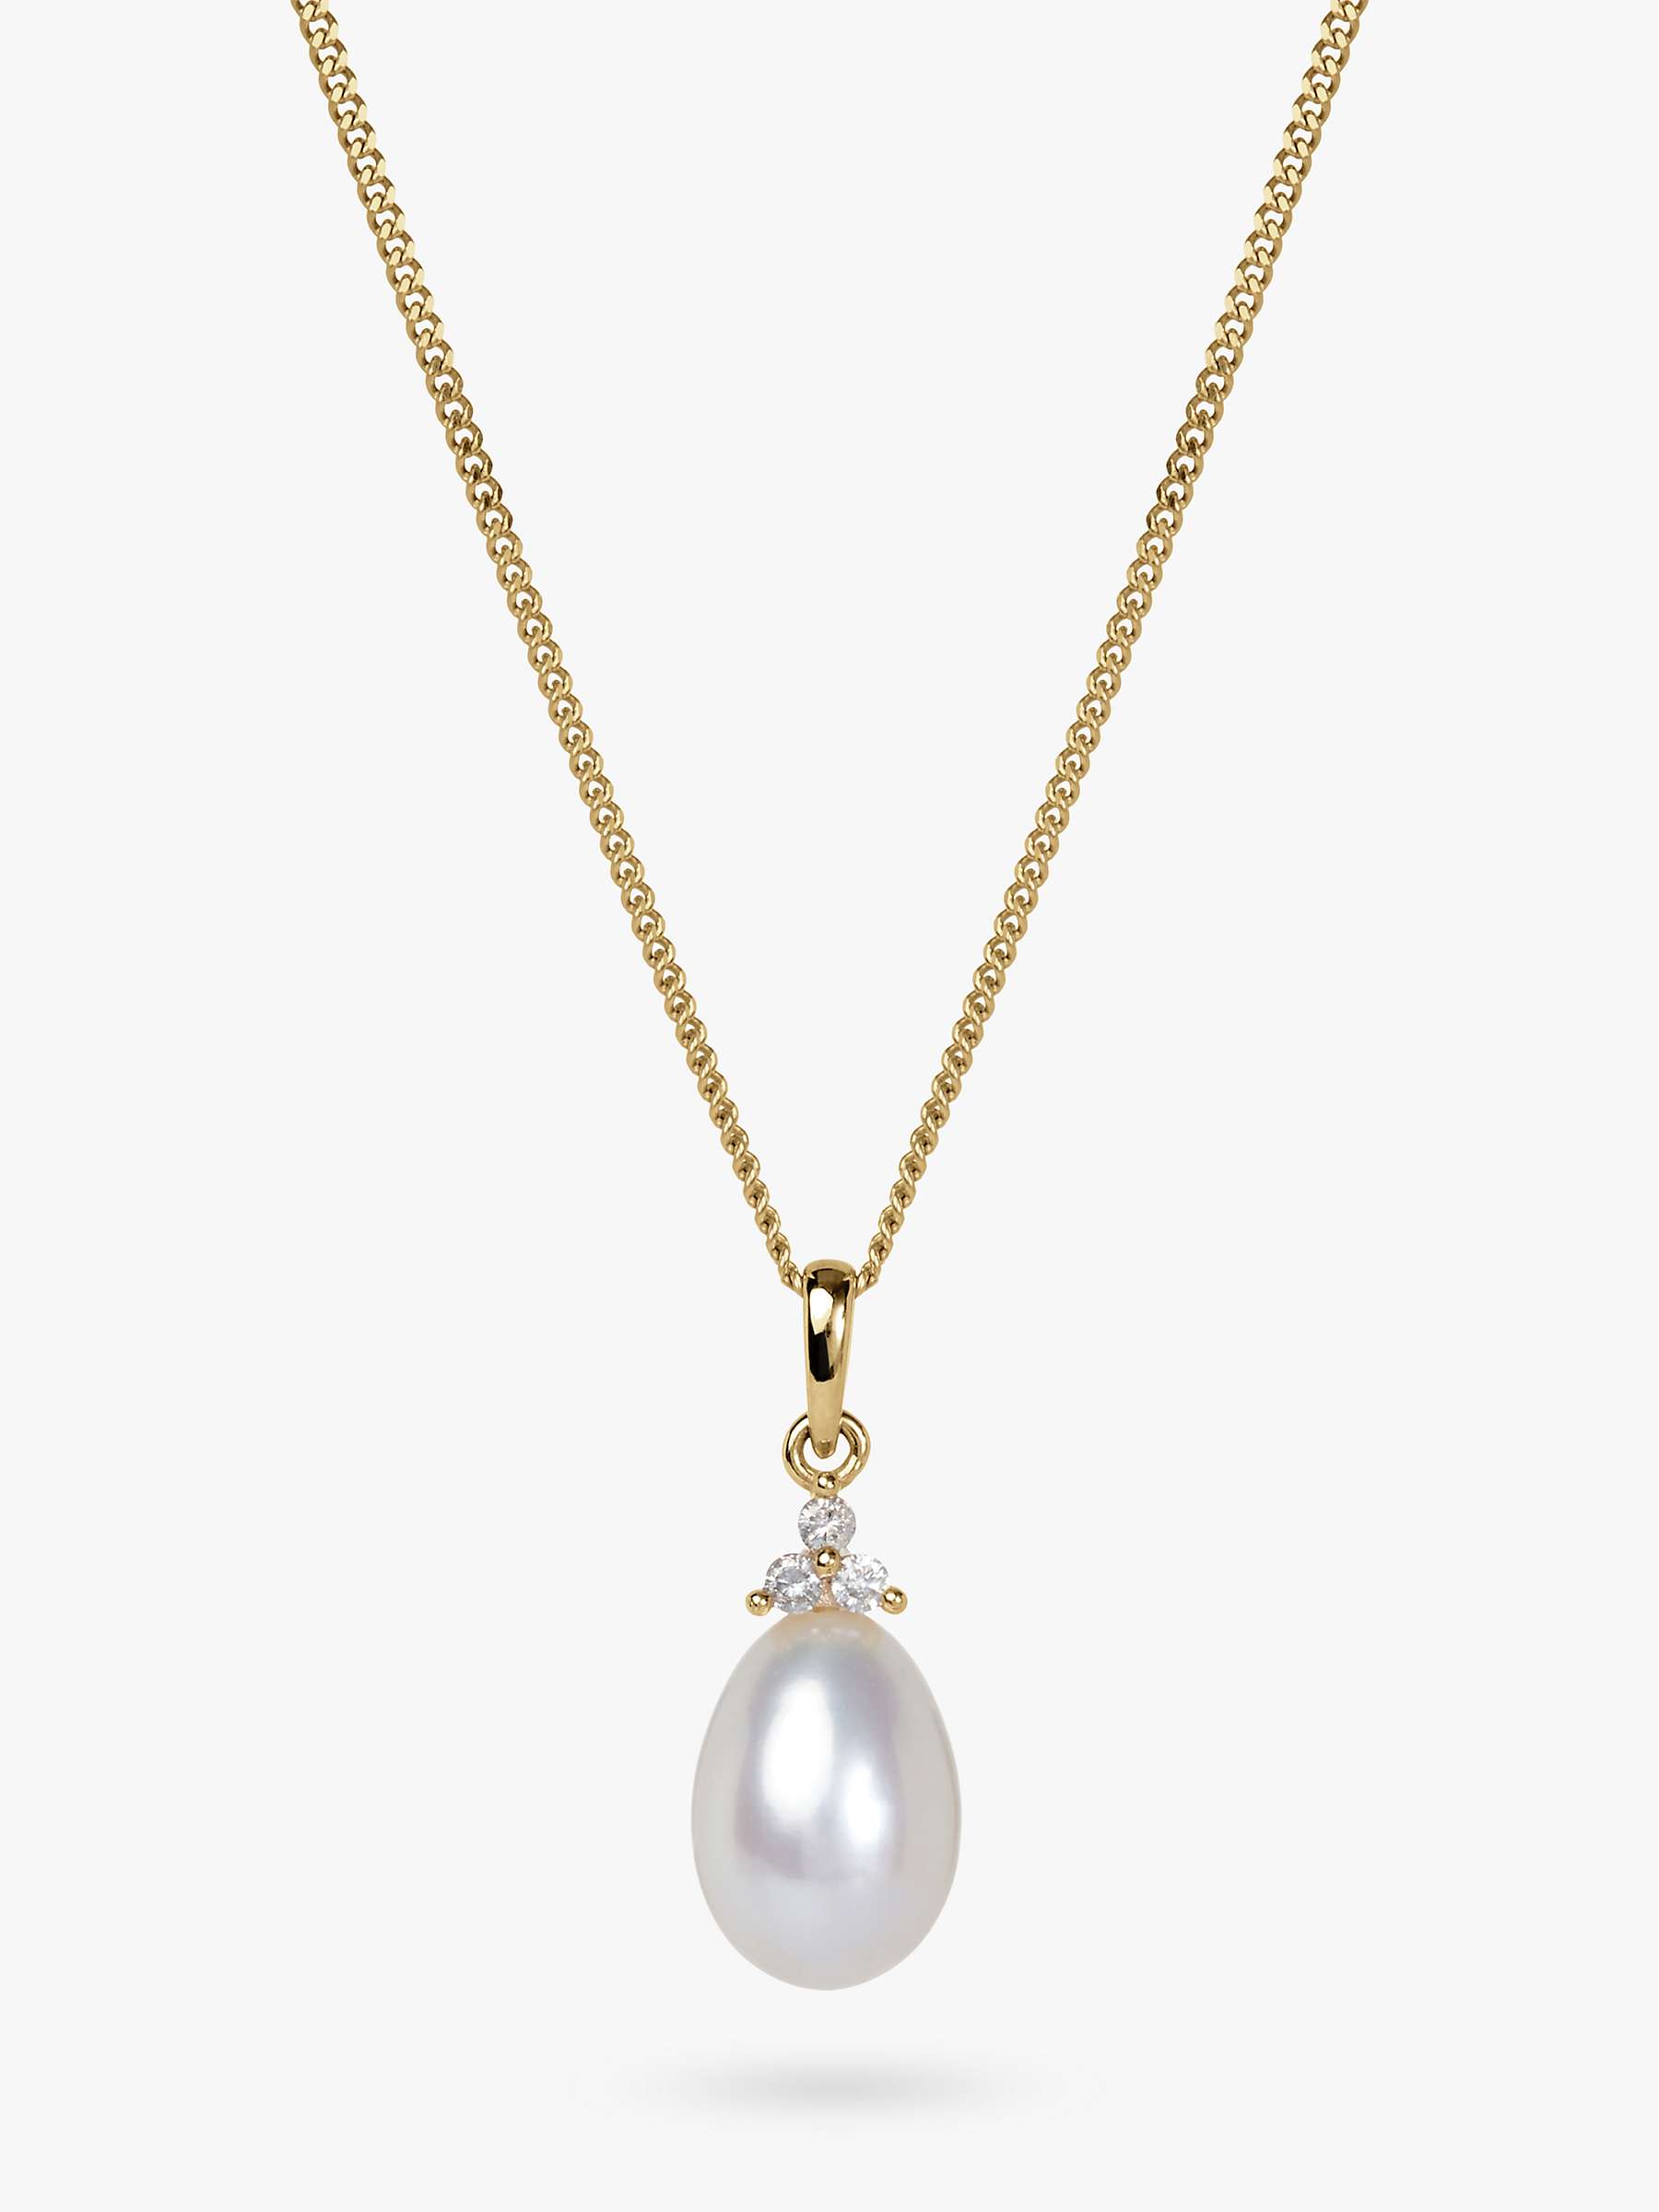 Buy A B Davis 9ct Gold Diamond and Pearl Pendant Necklace, Gold Online at johnlewis.com